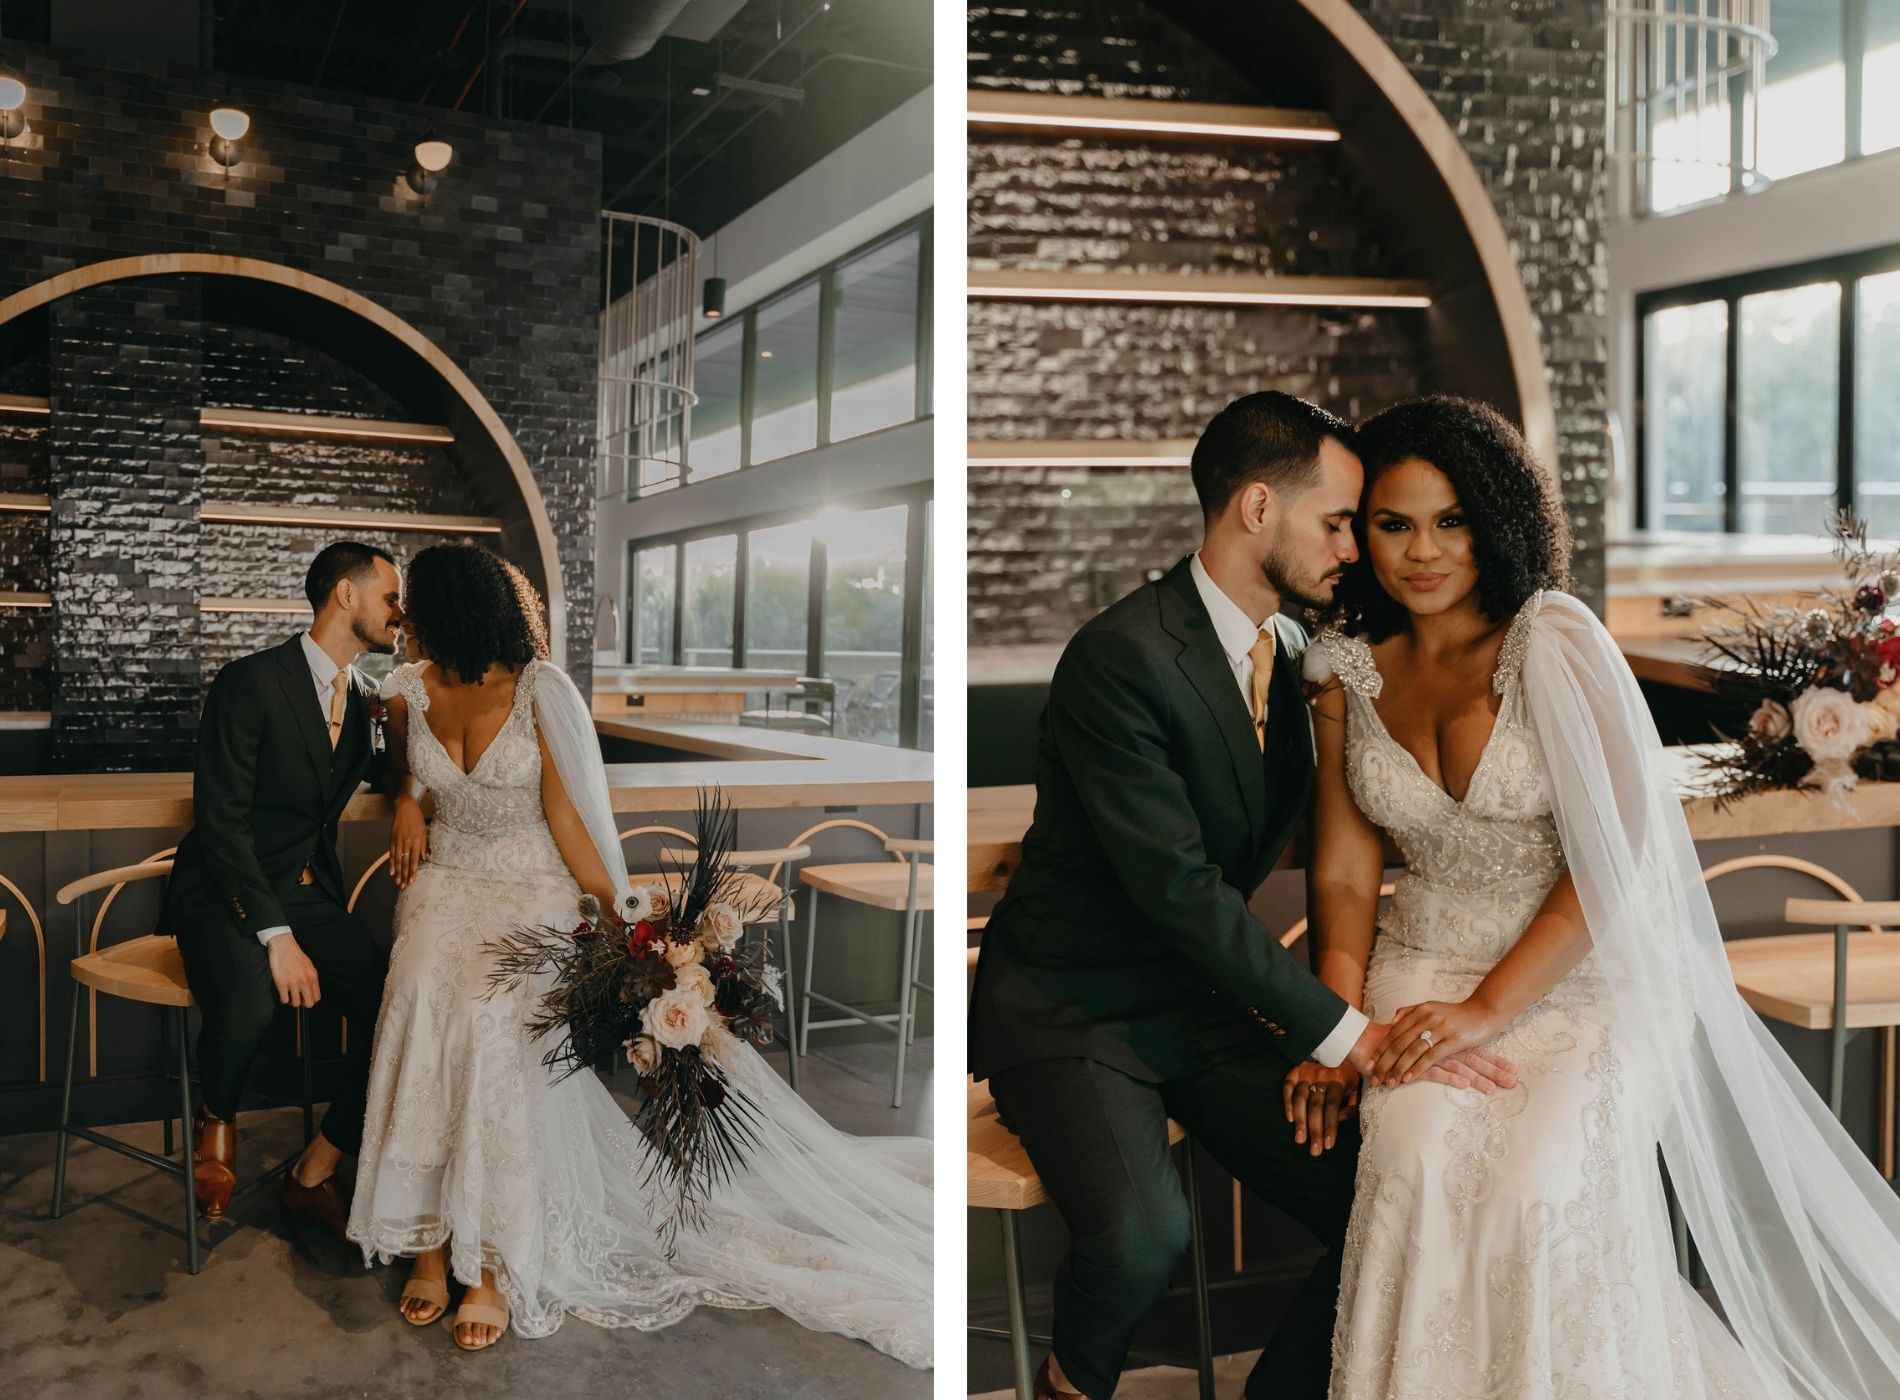 Indoor Bride and Groom Portrait in Tampa Wedding Venue Hyde House | Illusion Lace Embroidered Beaded V Neck Wedding Dress Bridal Gown with Sheer Tulle Cape Sleeves by Designer Amalia Carrara Bridal | Groom in Classic Black Tux Suit with Gold Tie